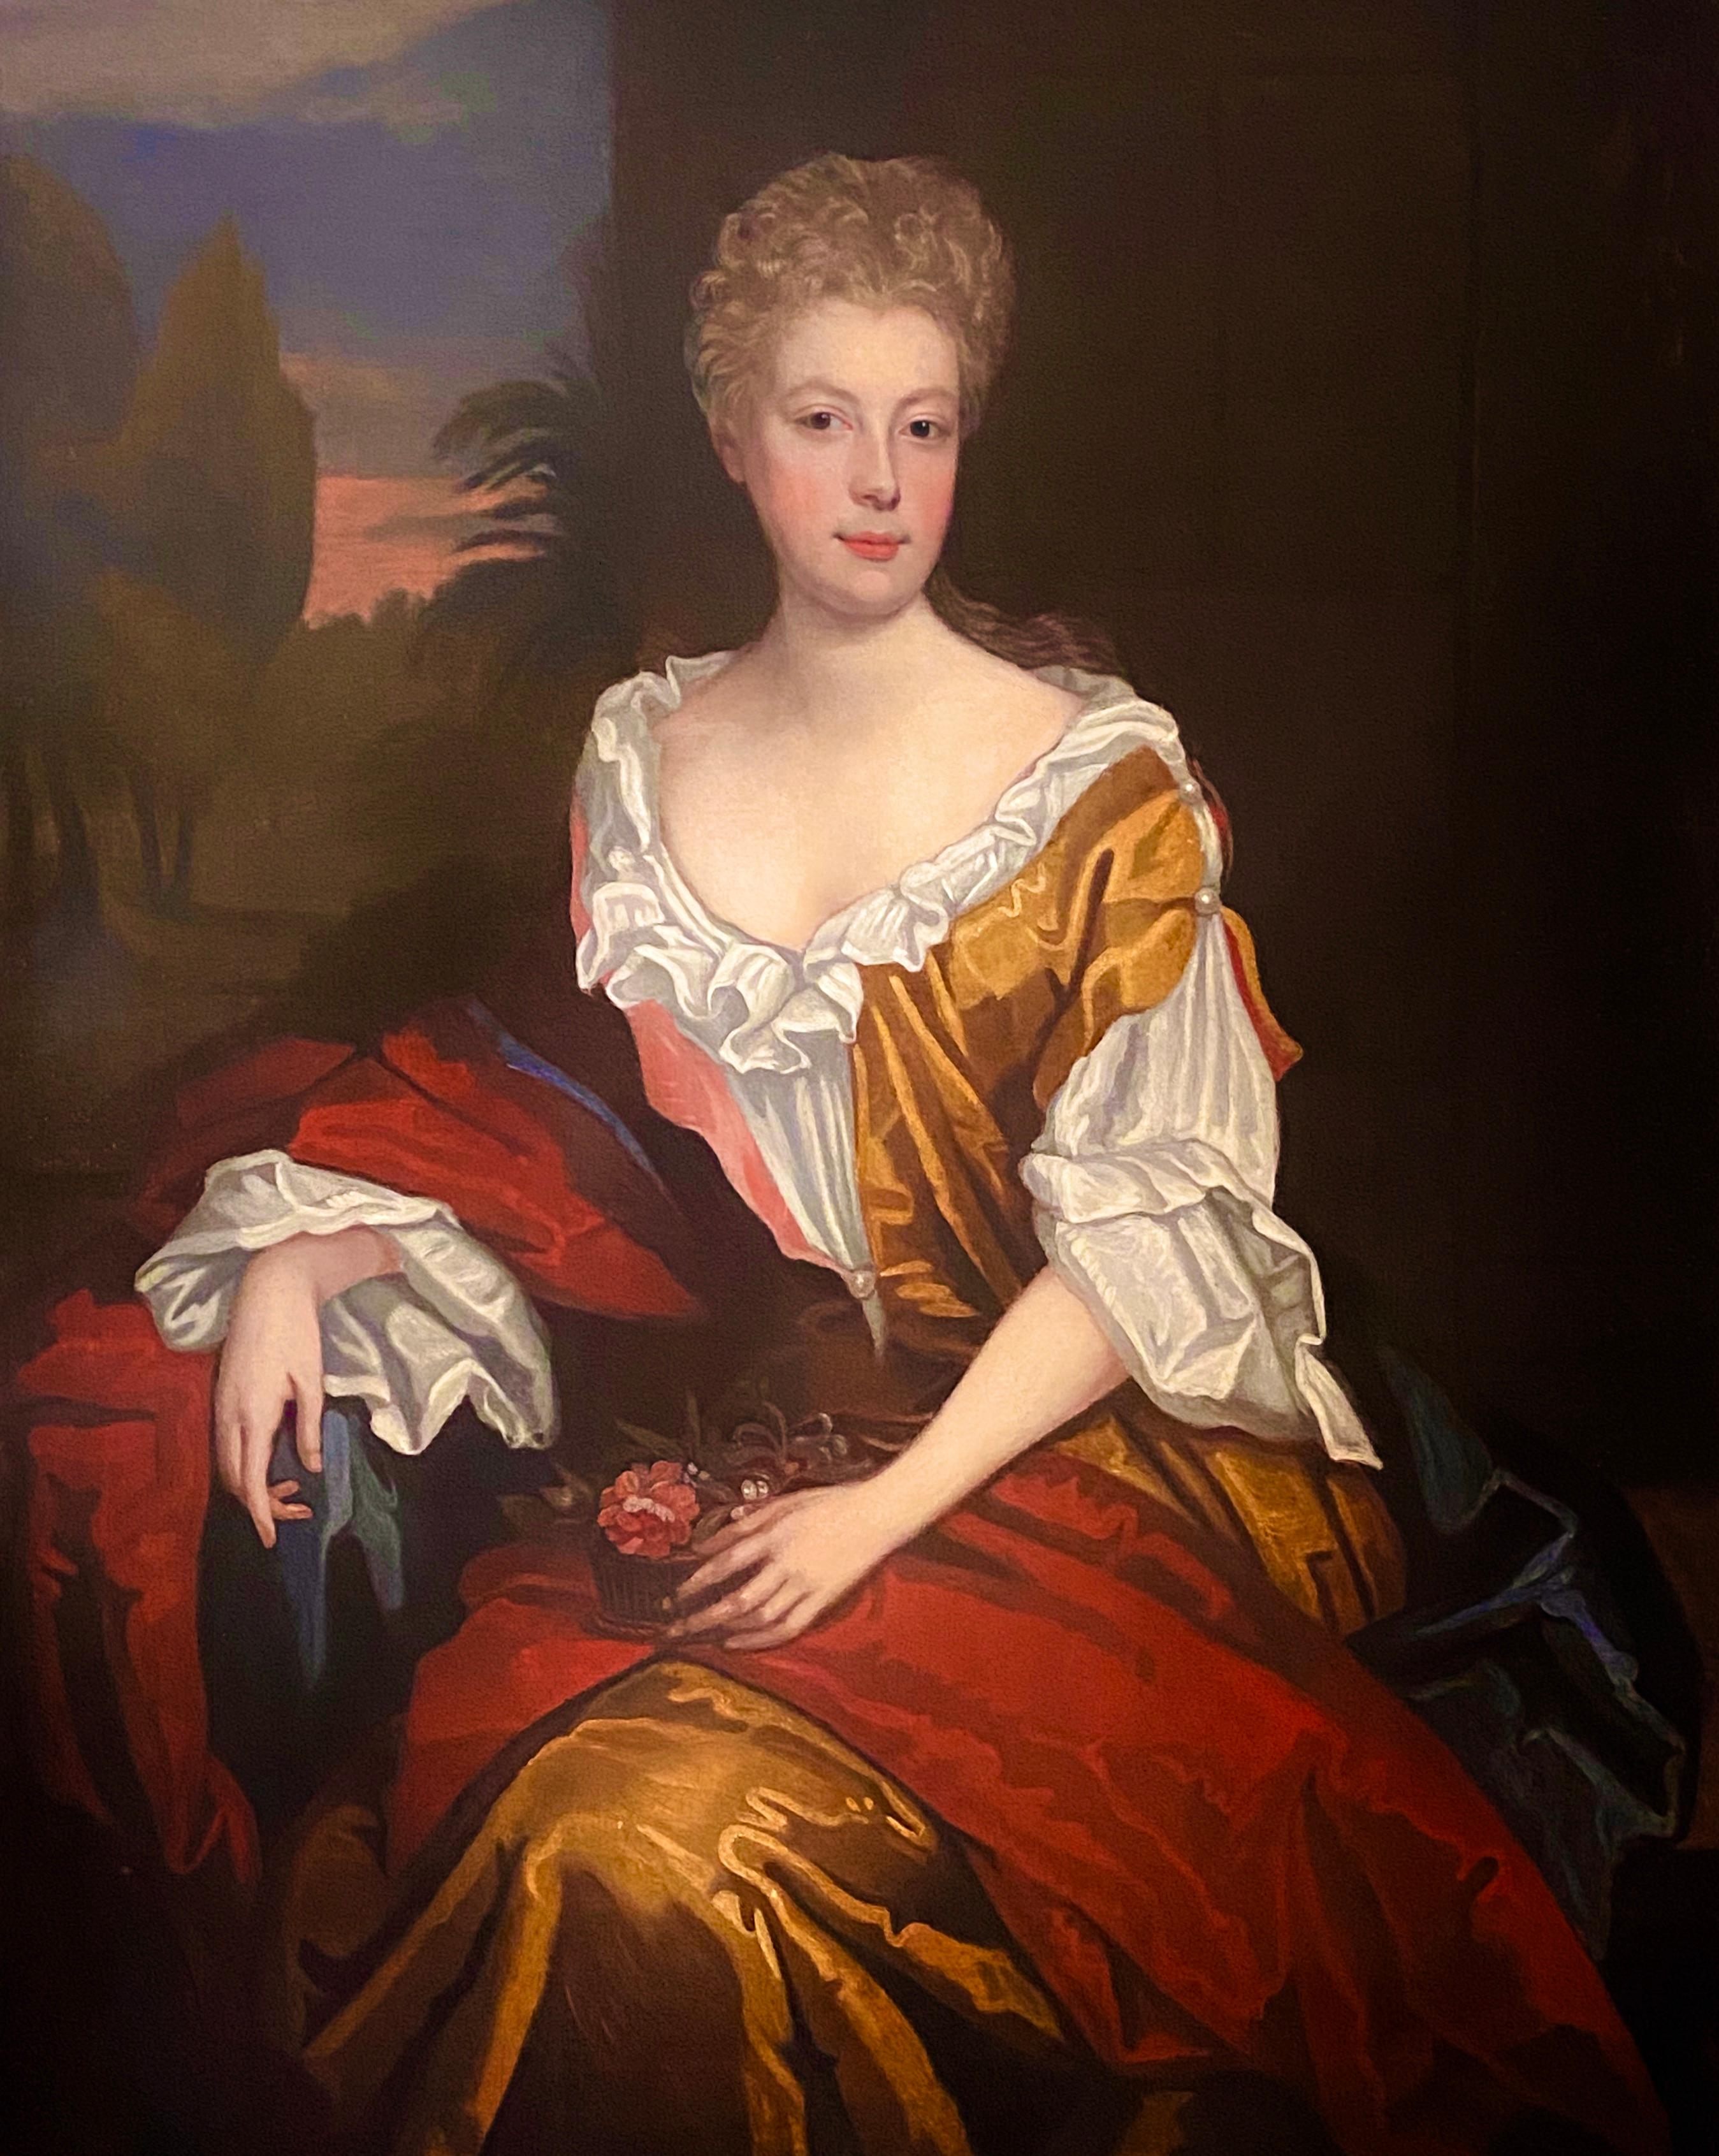 LATE 17TH CENTURY ENGLISH PORTRAIT - A LADY  IN A RED / YELLOW SILK DRESS c.1700 - Painting by Follower of Willian Wissing